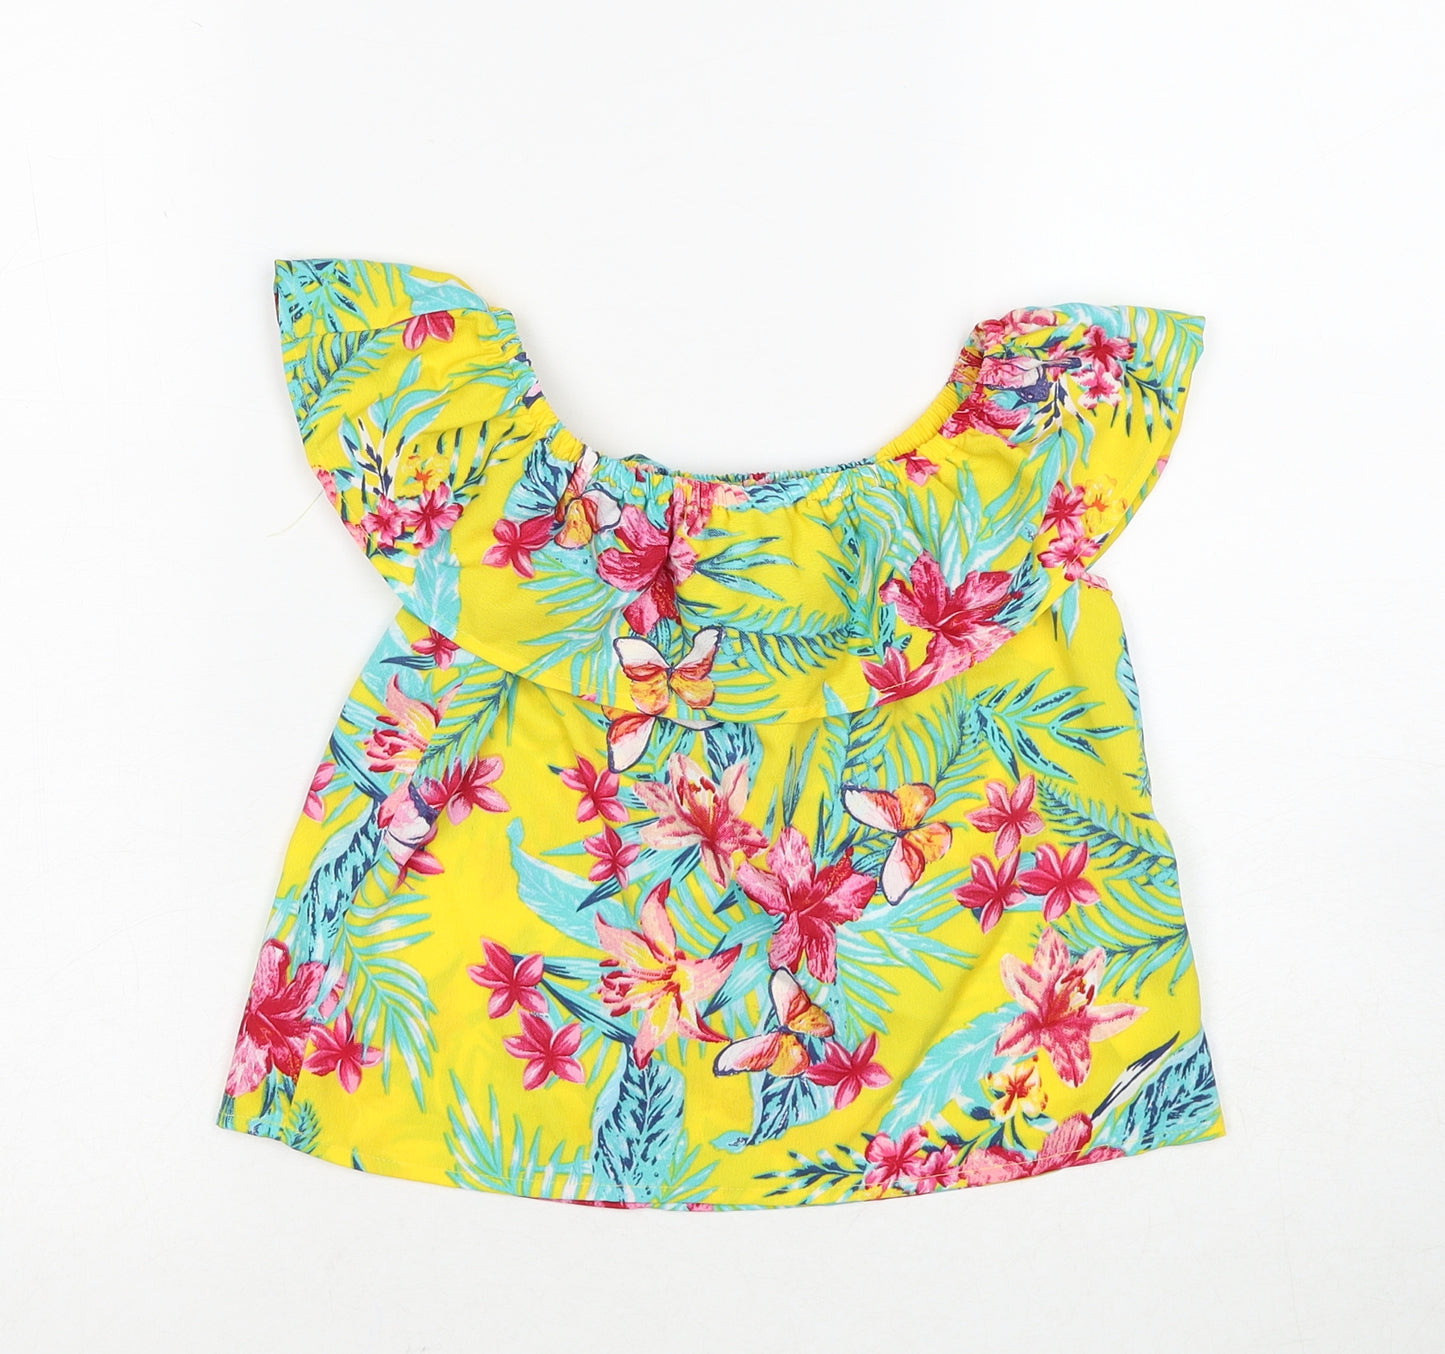 Primark Girls Yellow Floral Polyester Basic Blouse Size 8-9 Years Round Neck Pullover - Tropical Print